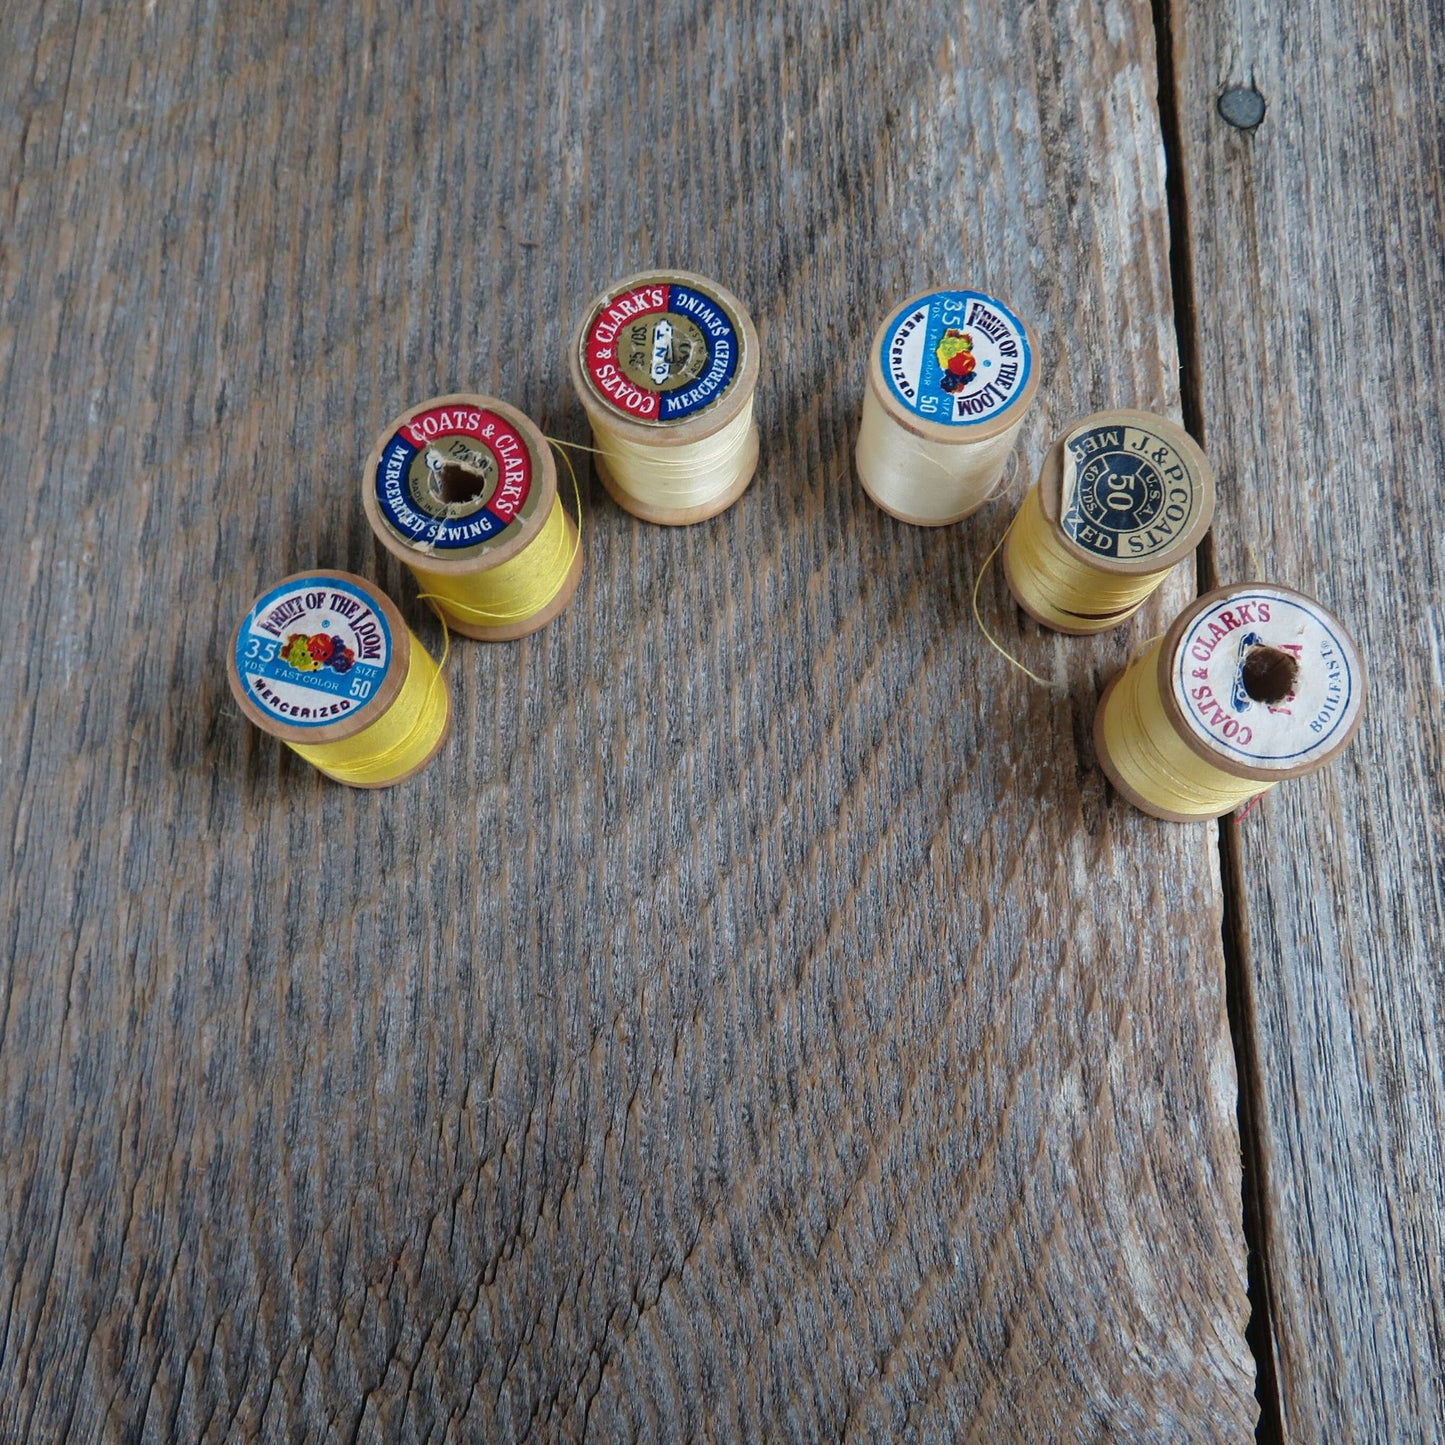 Wooden Spools Yellow Thread Set Fruit of the Loom Coat's and Clark's J&P Coats Boilfast Craft Part Wood